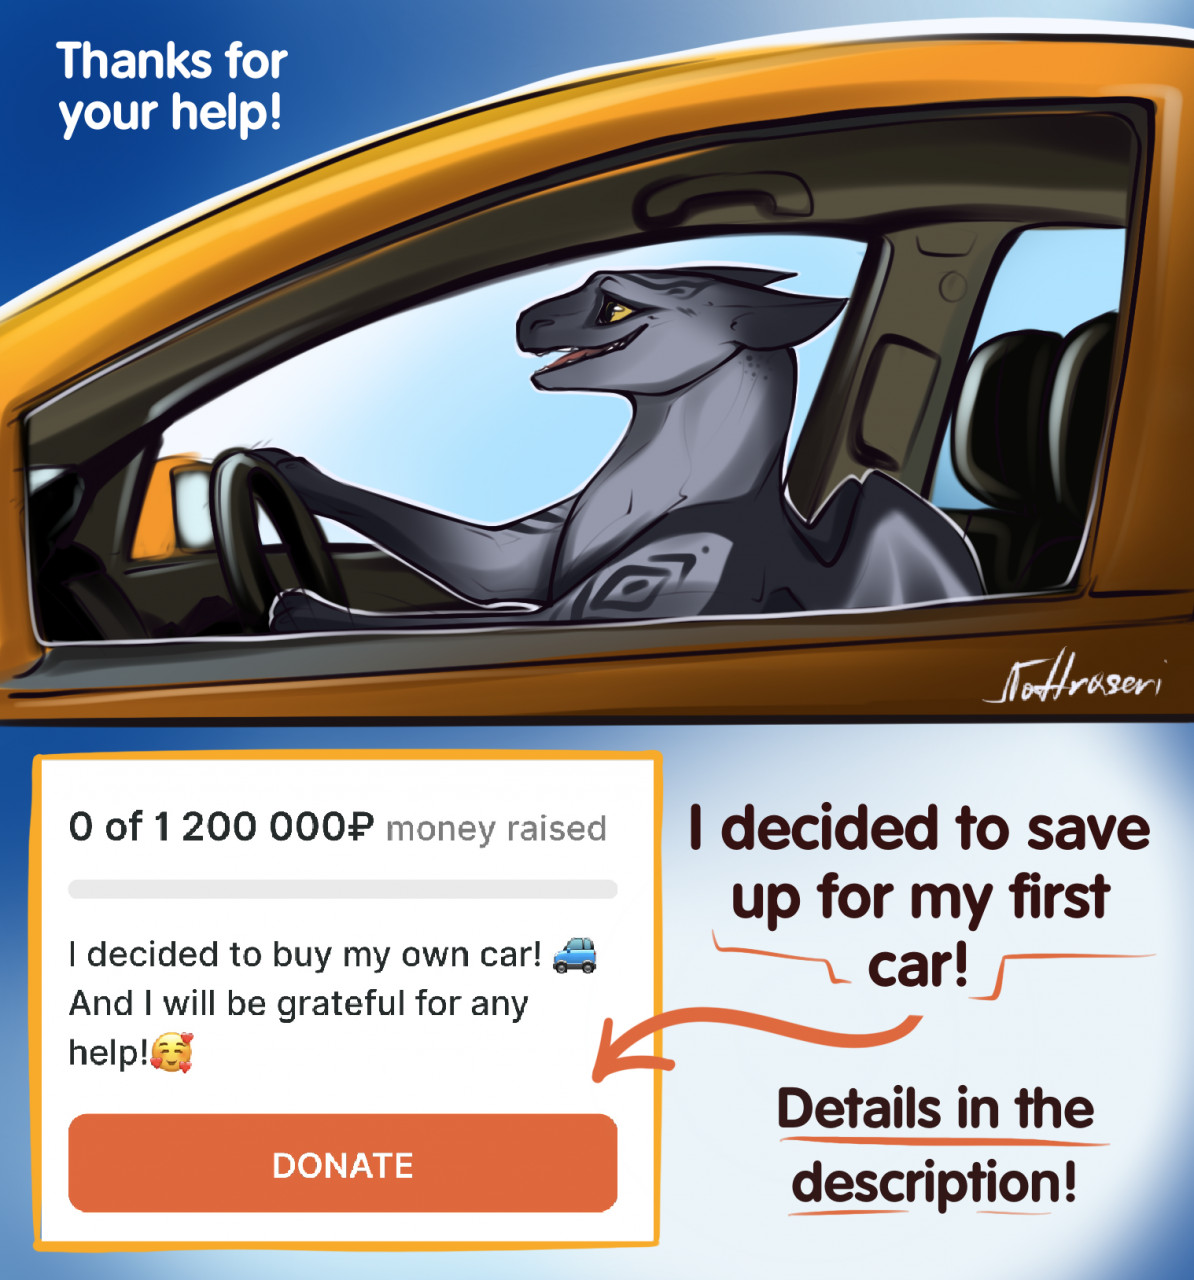 Download font donate your car